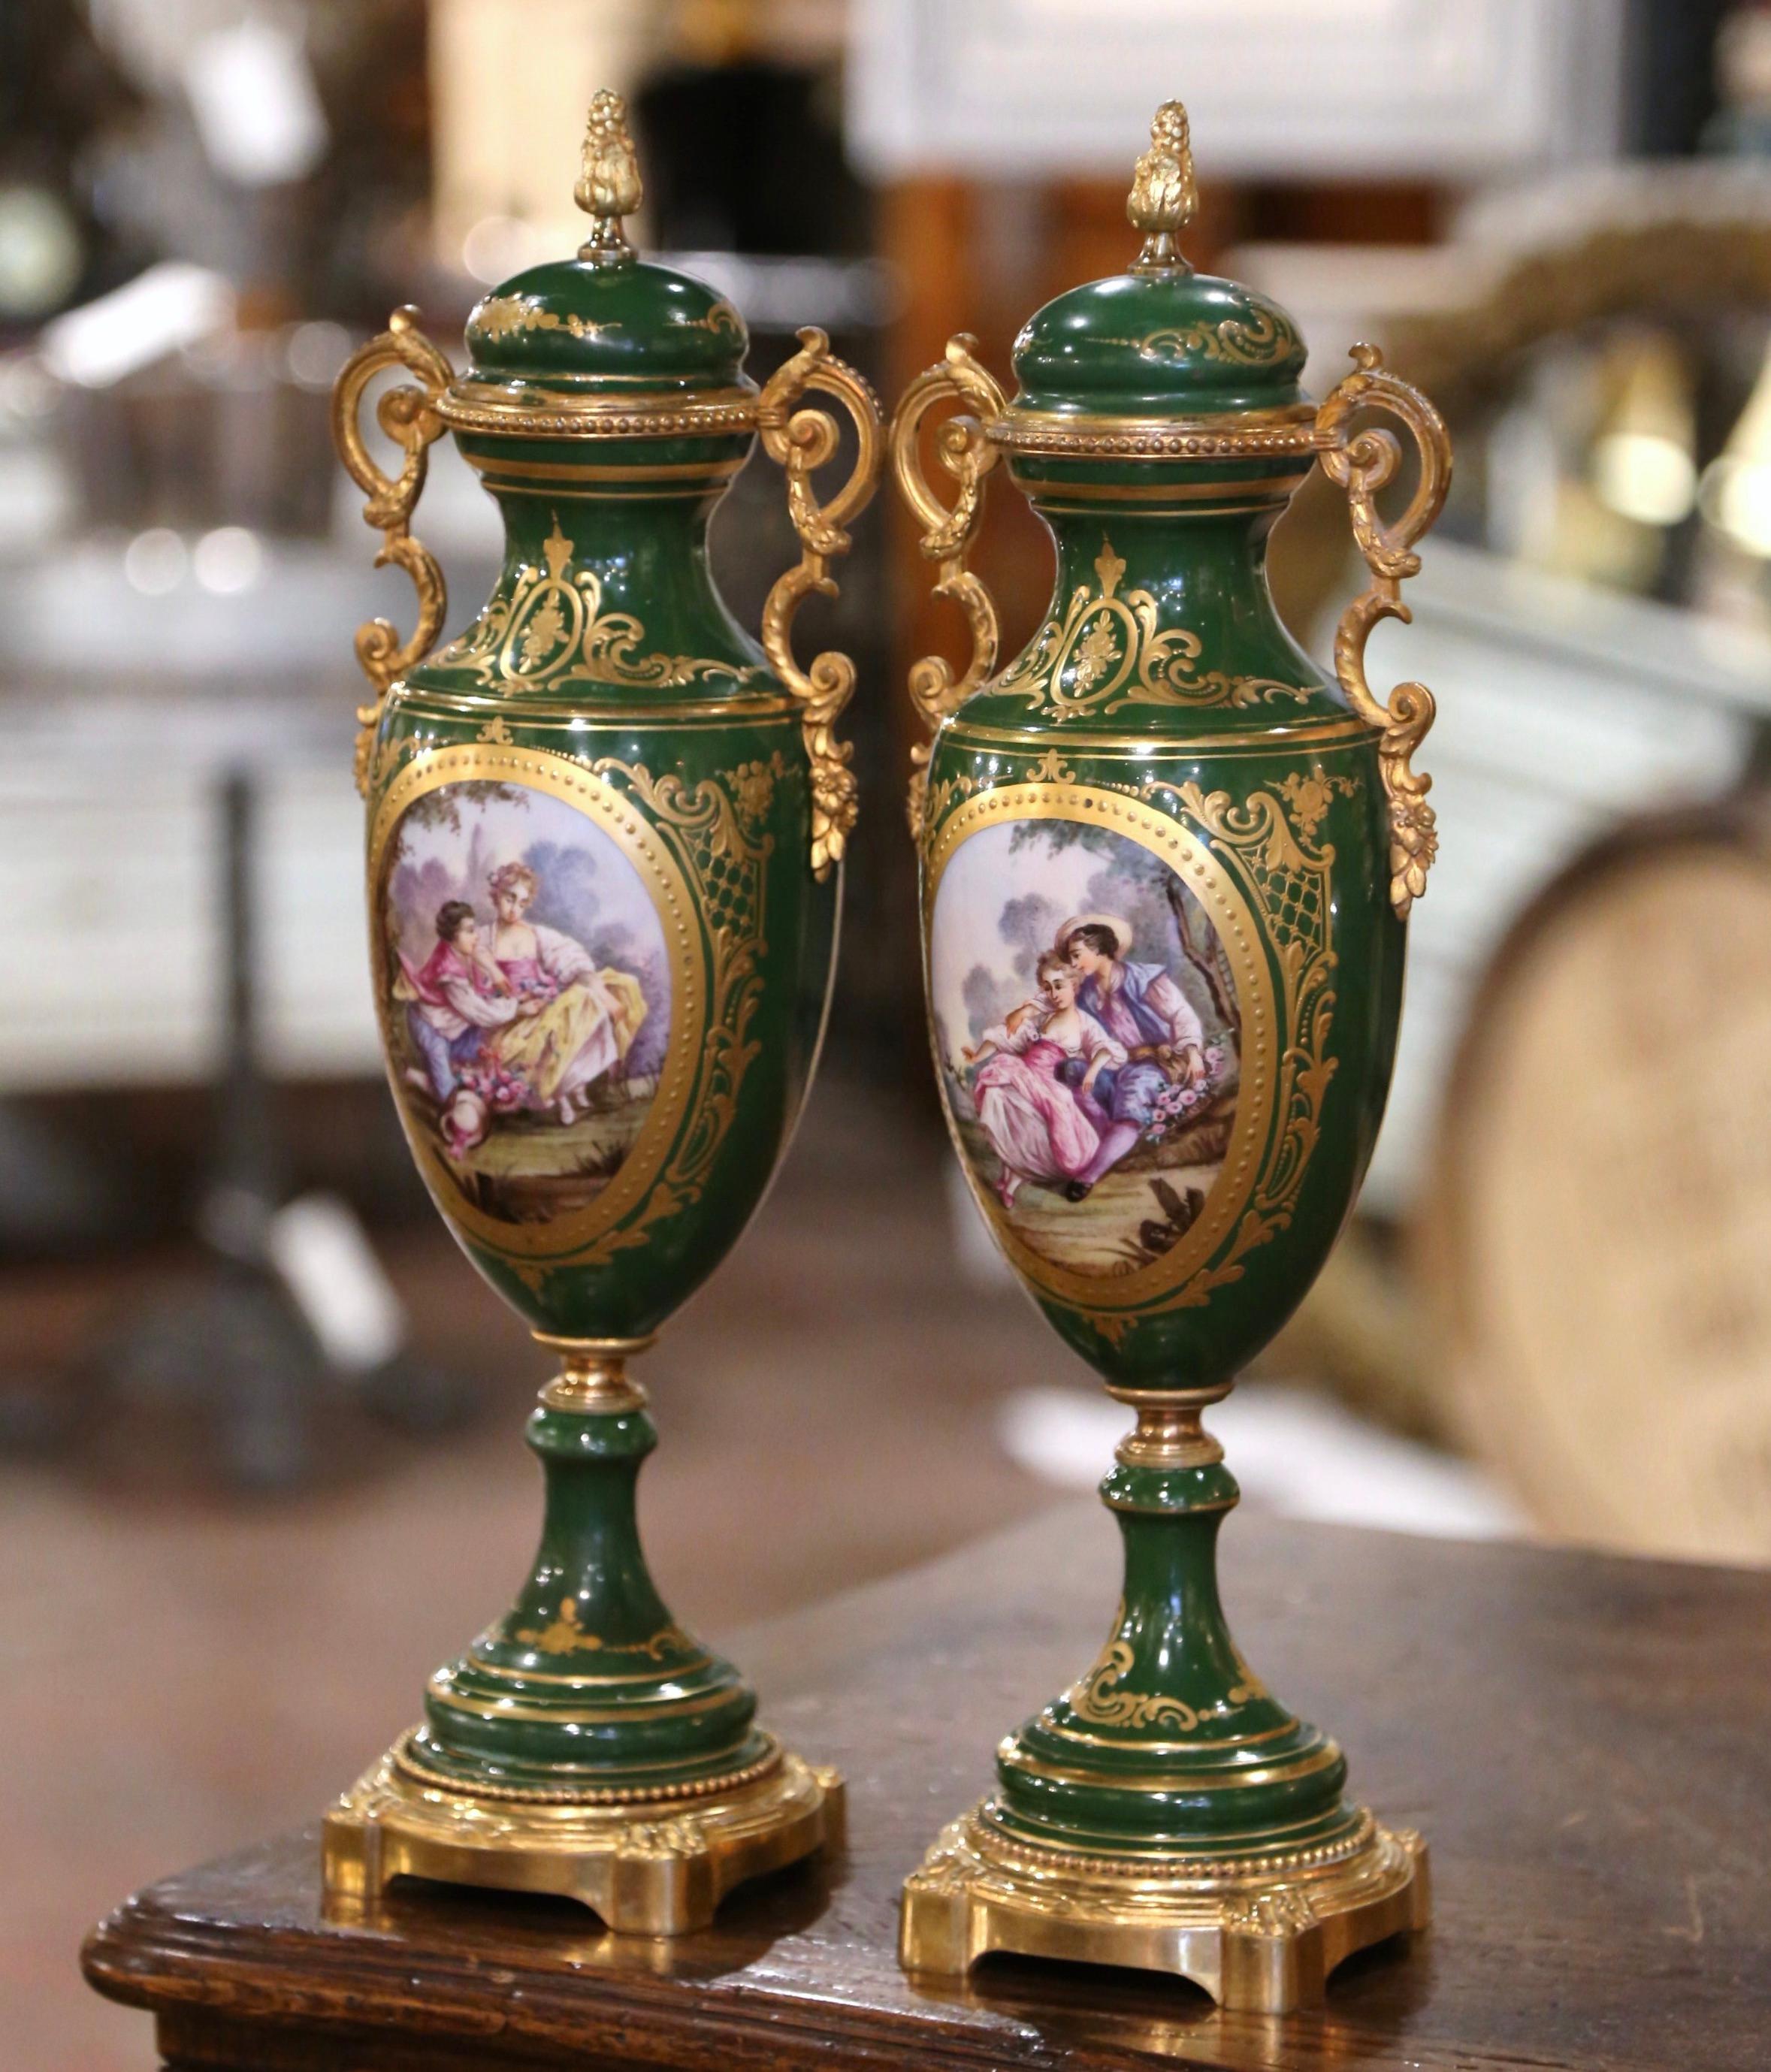 Decorate a mantel or a console with this elegant pair of porcelain and gilt metal Sèvres urns. Created in Paris, France, circa 1880, each colorful vase sits on a round gilt base decorated with acanthus leaf motifs over the feet. Each urn is